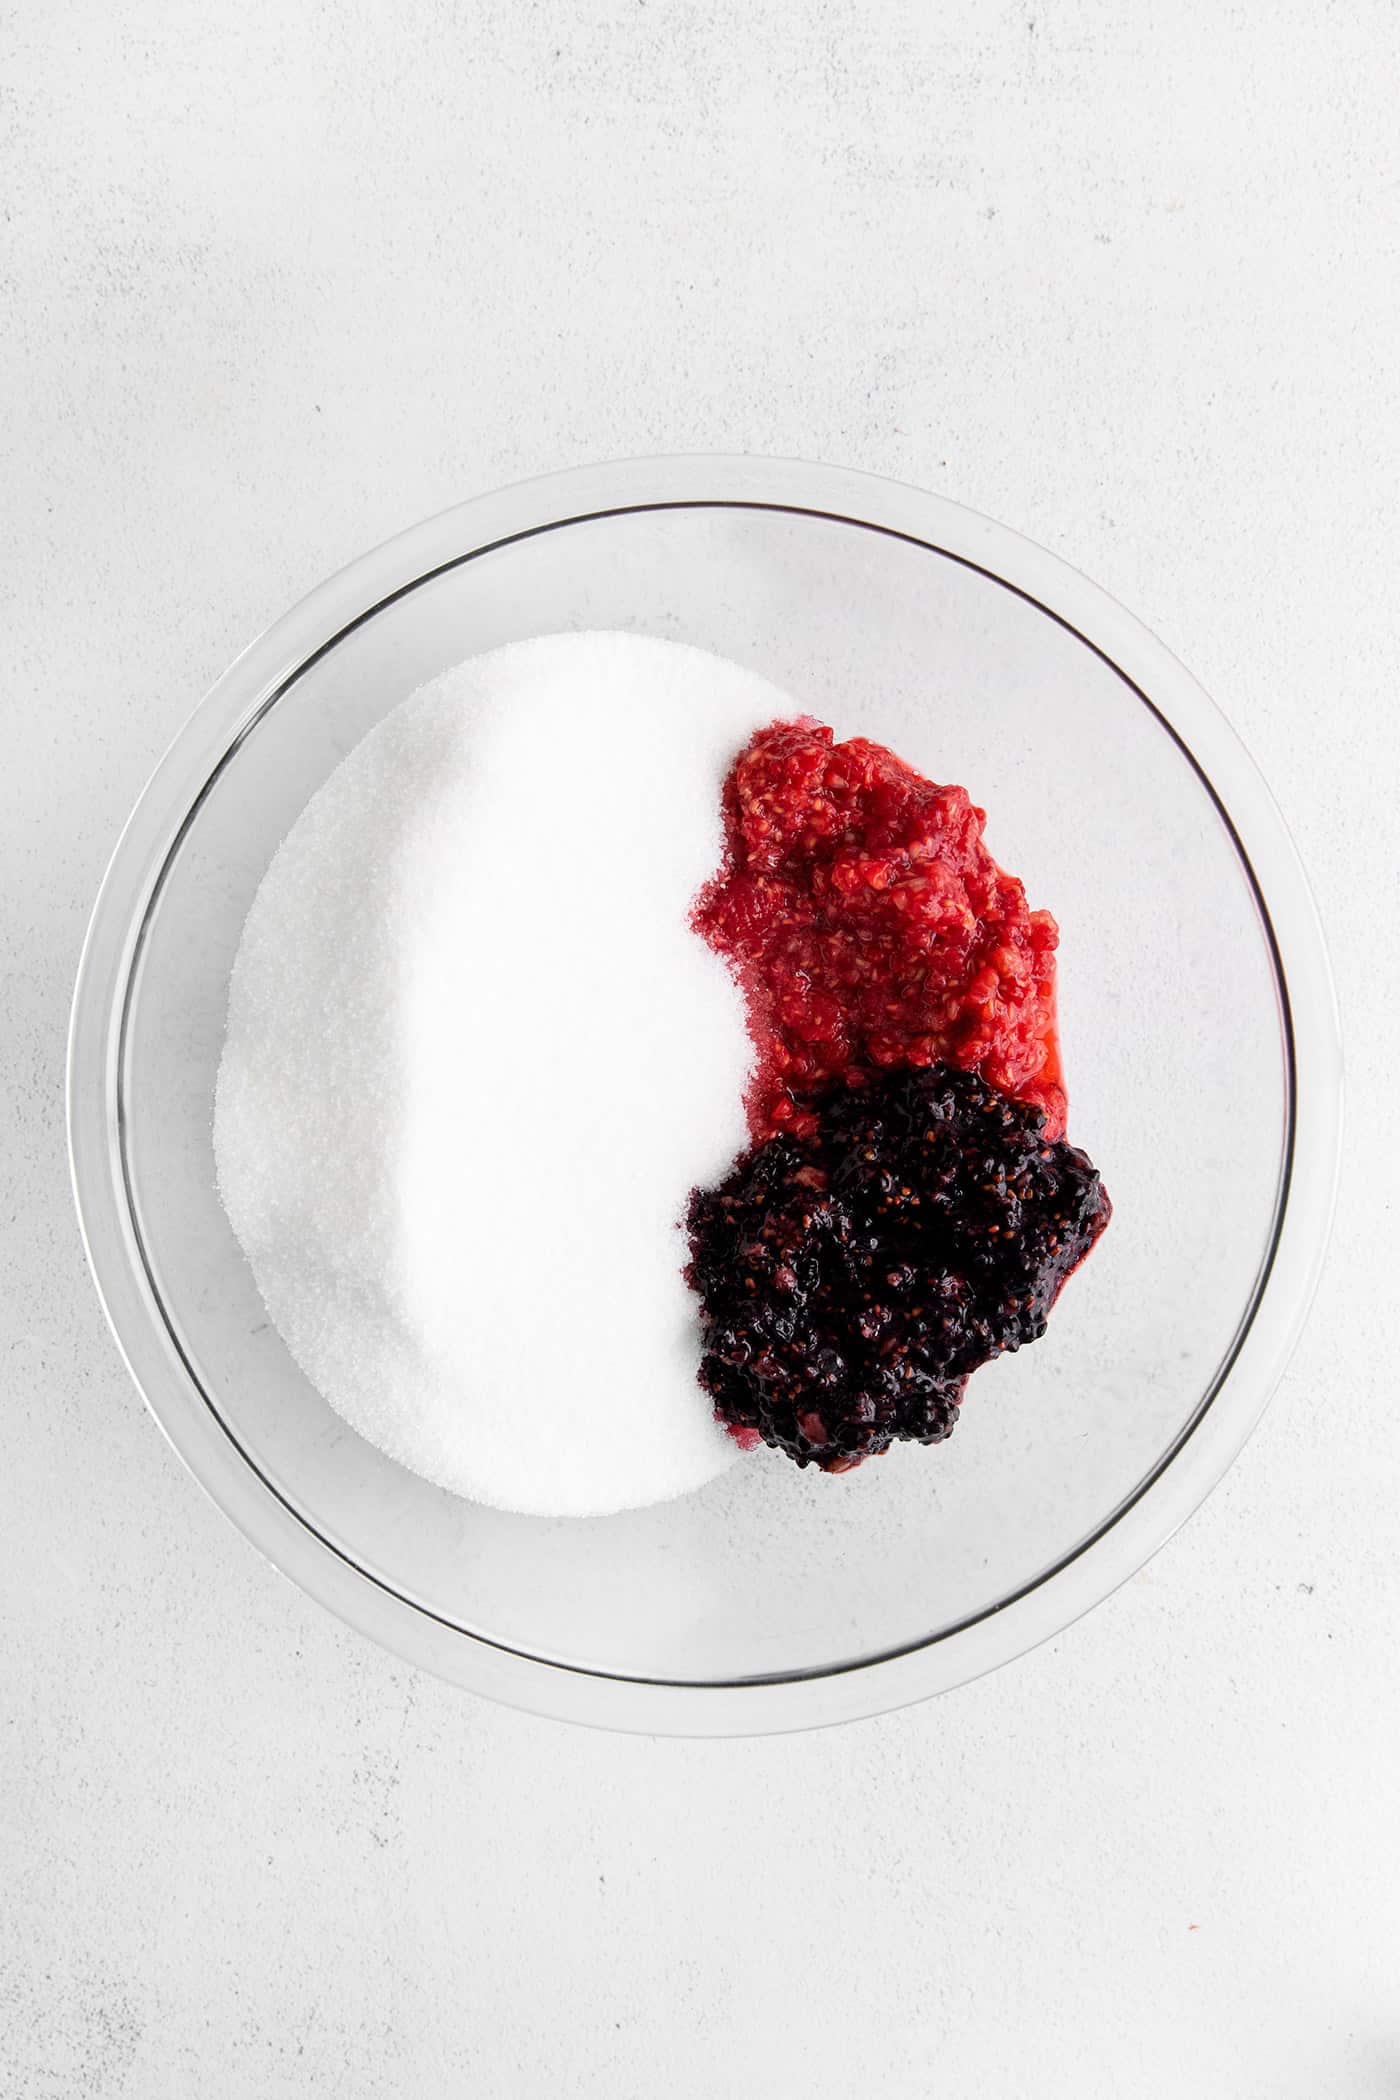 Mashed raspberries and blackberries in a bowl with sugar